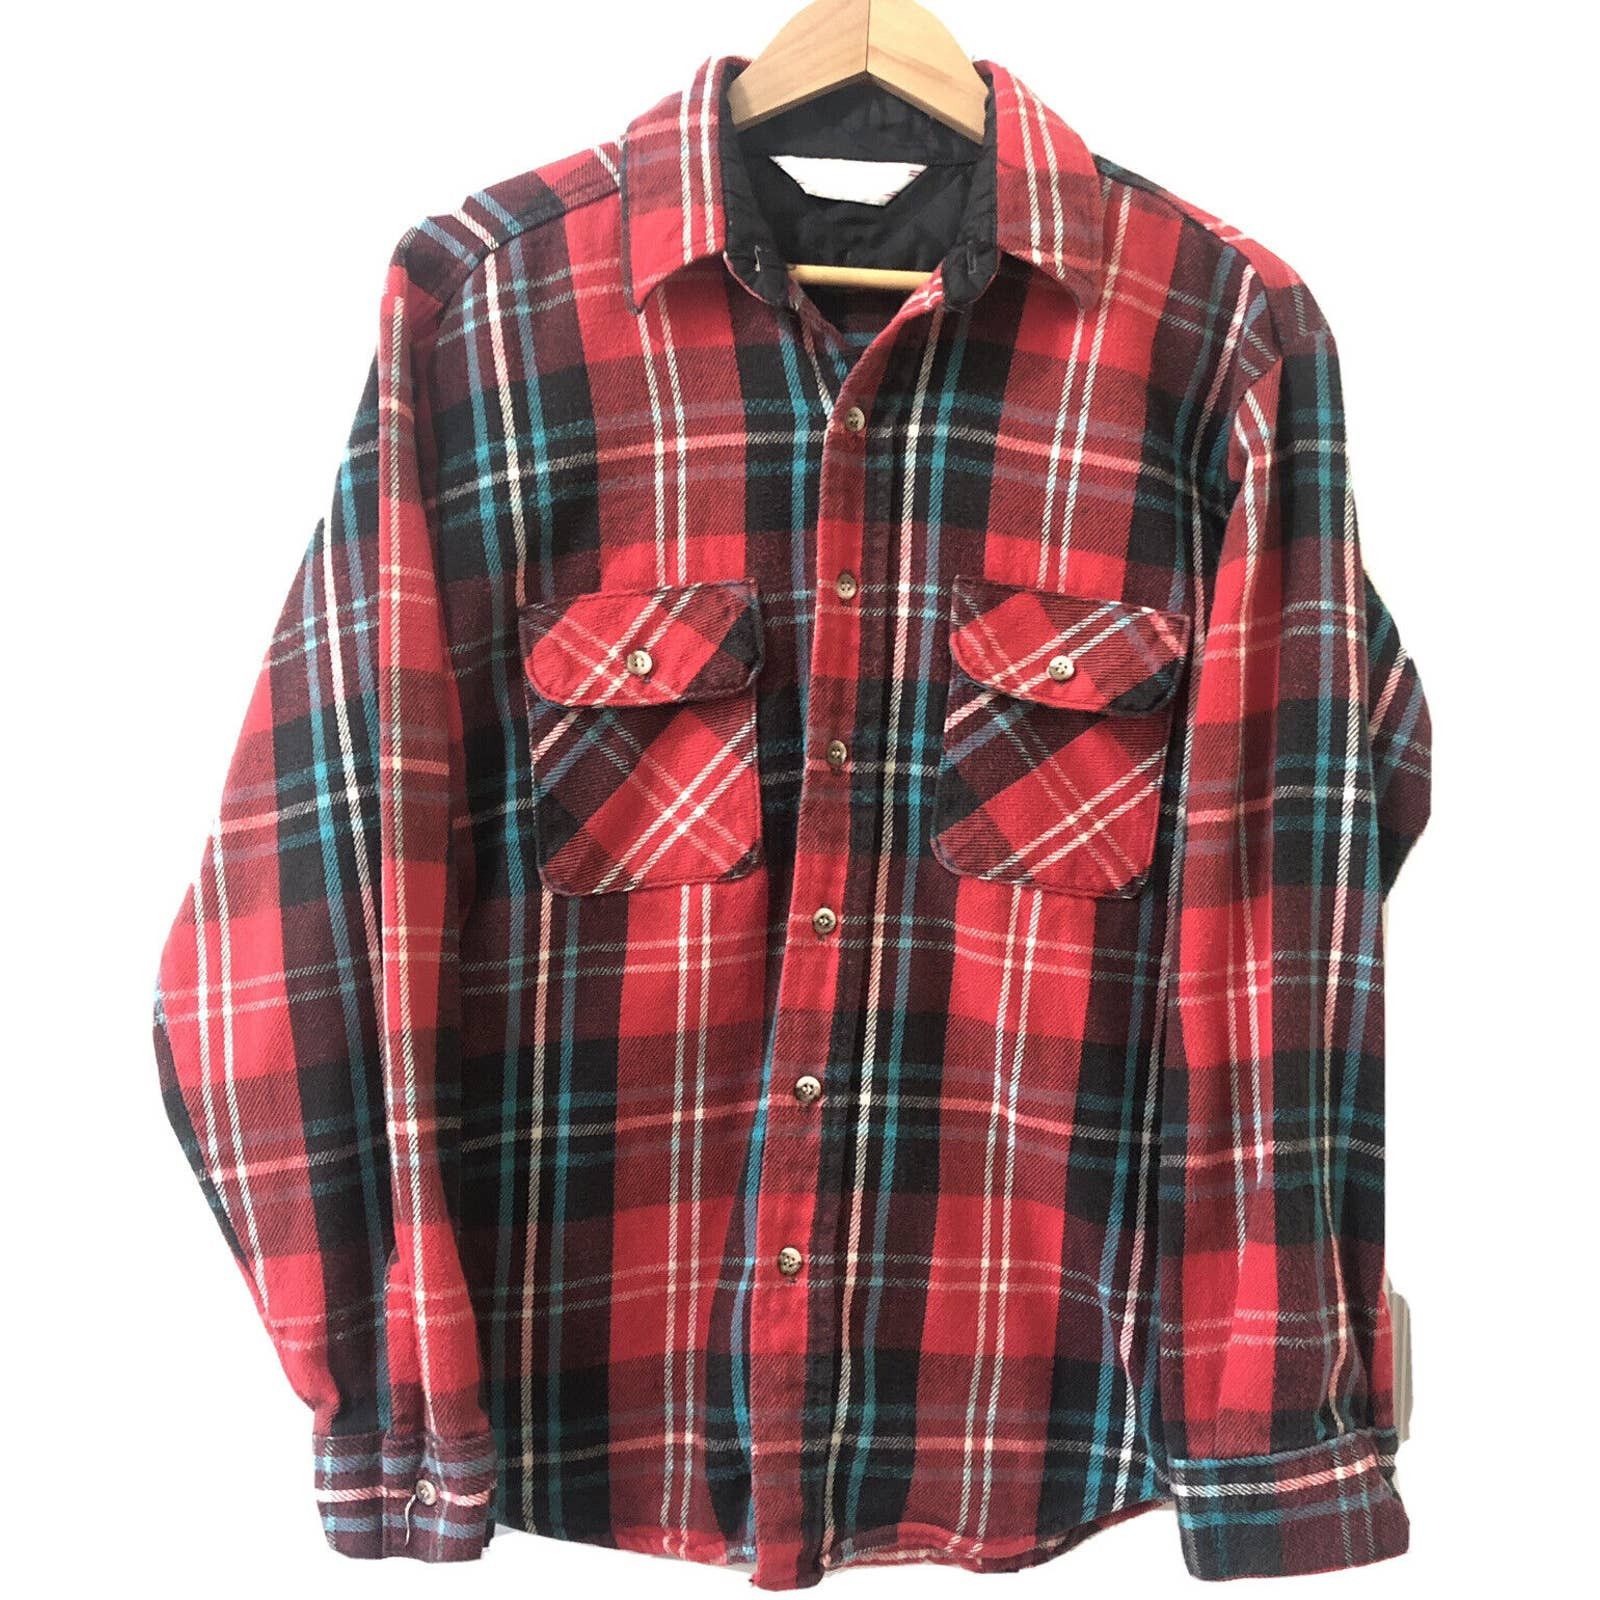 Field And Stream Vintage Field & Stream L Heavy Flannel Red Plaid Made USA Size US L / EU 52-54 / 3 - 2 Preview